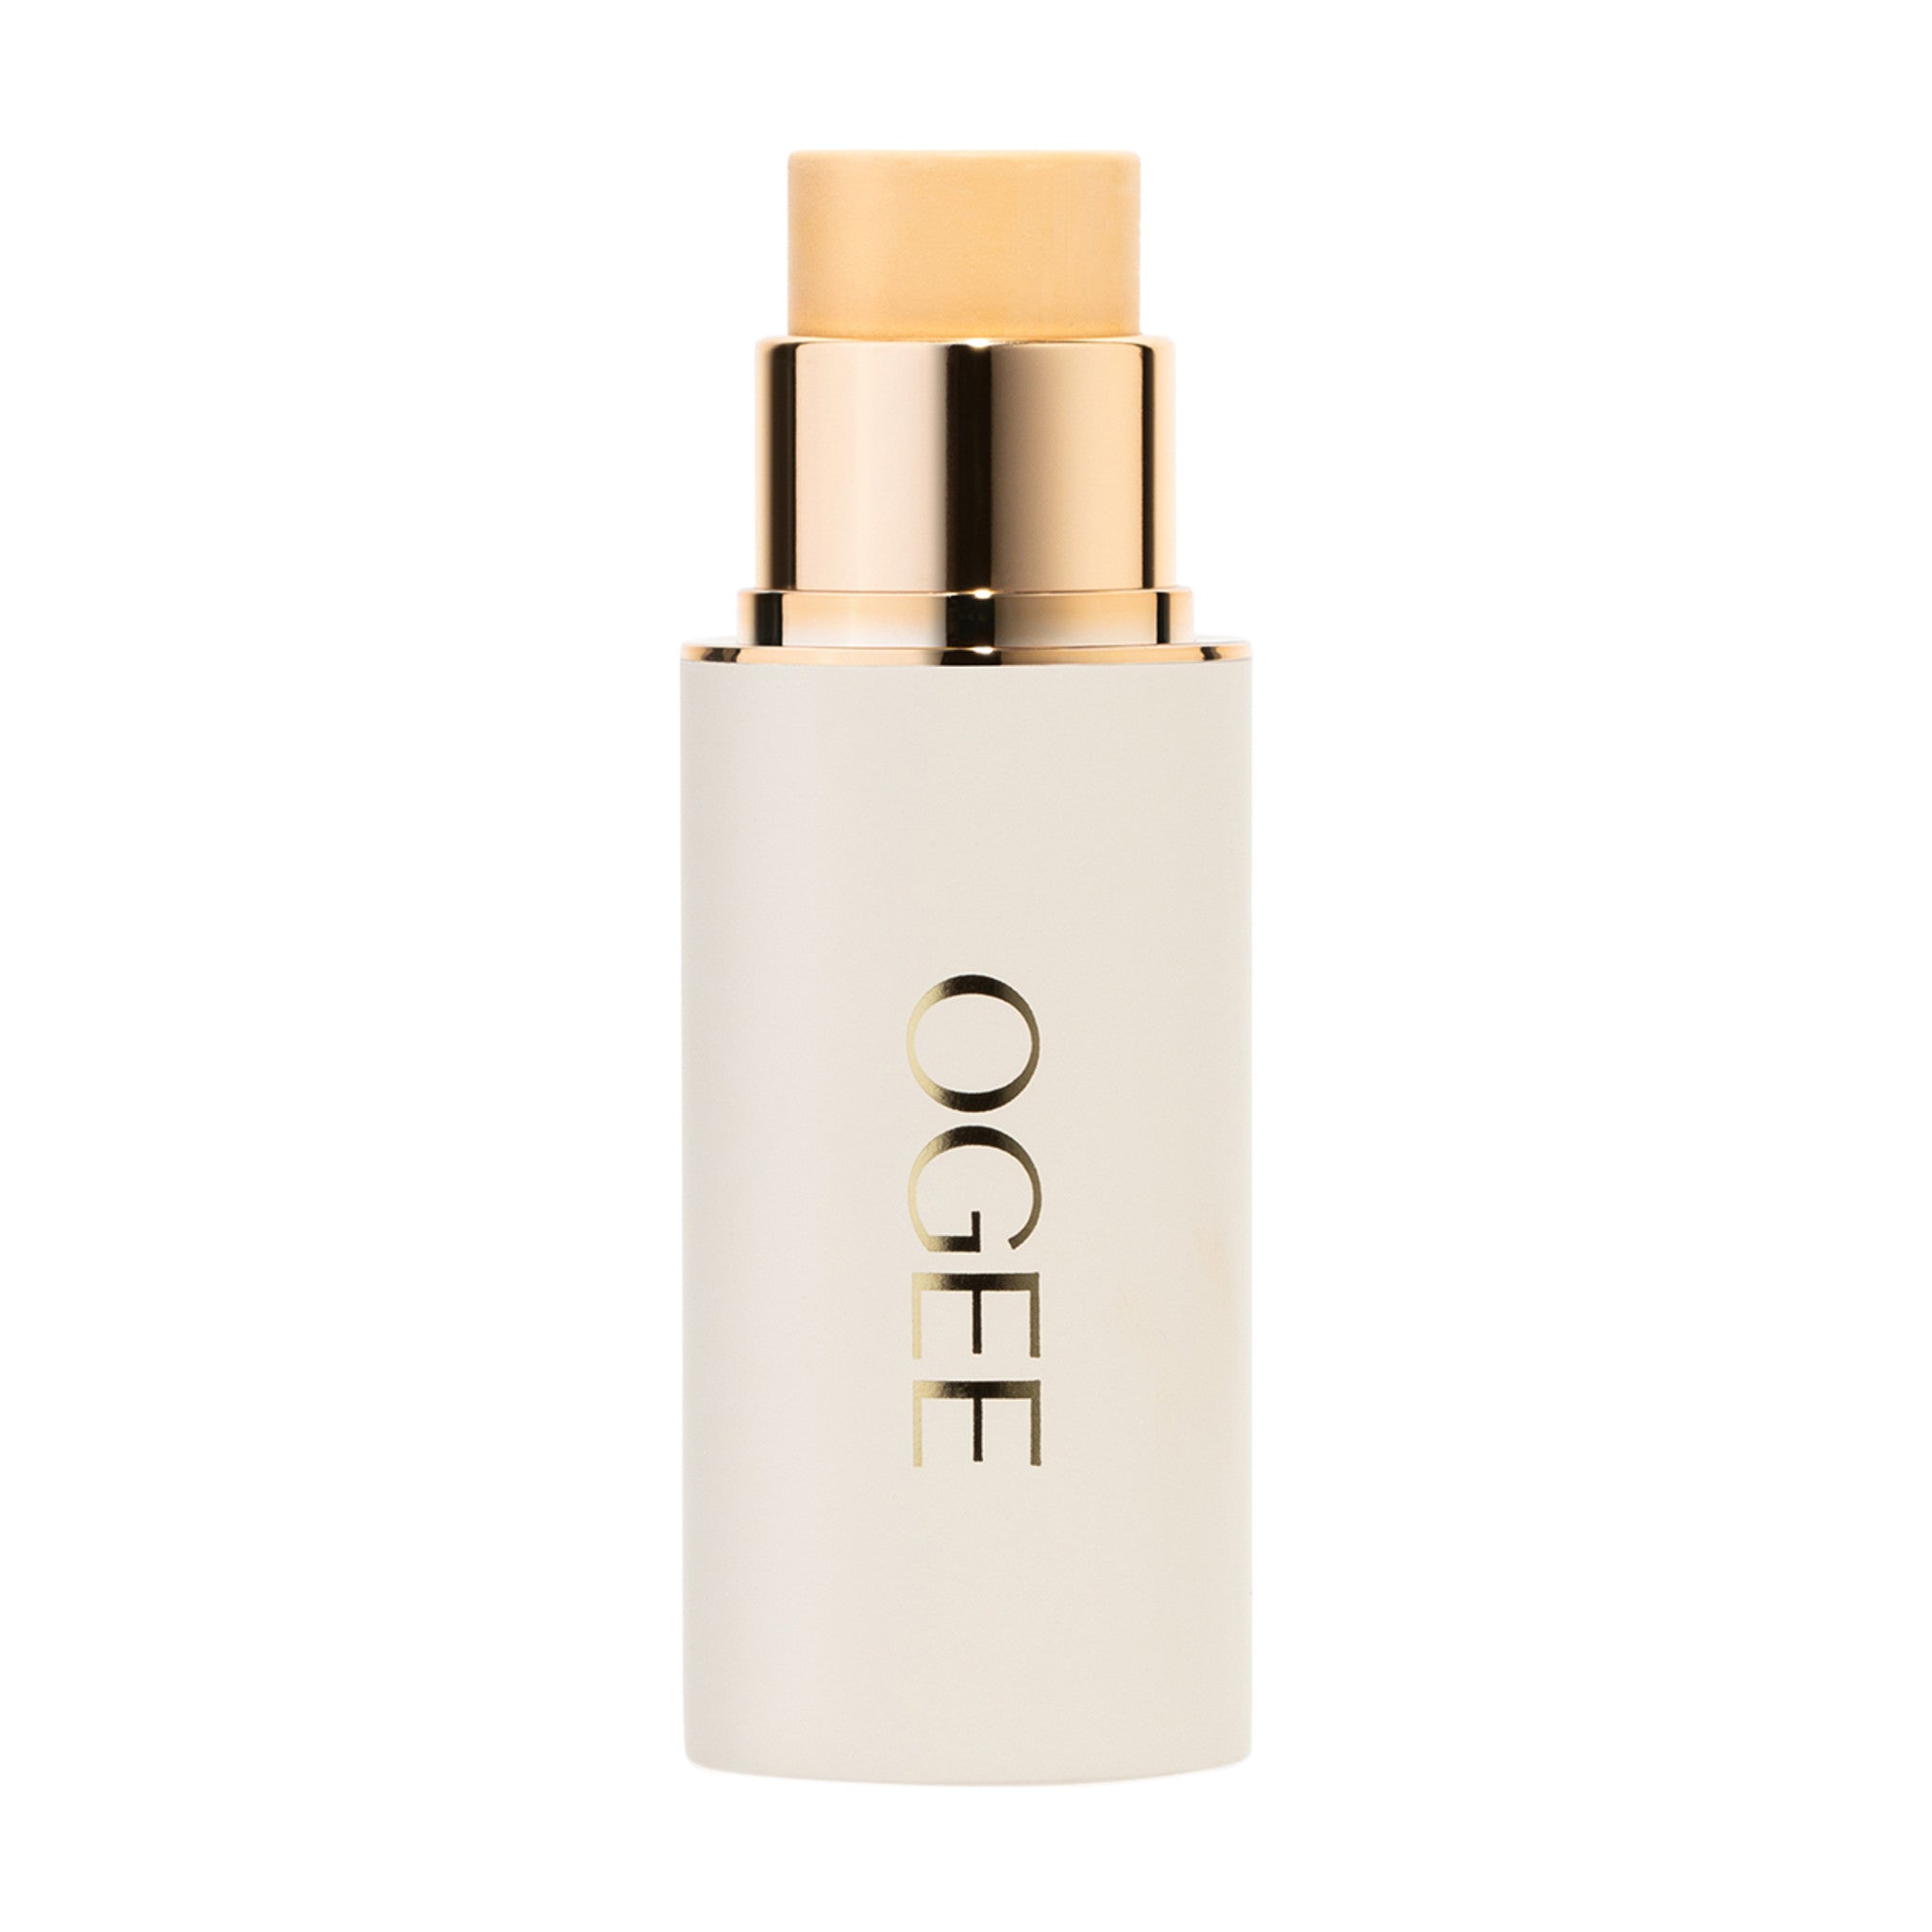 Ogee Sculpted Complexion Stick Color/Shade variant: Aspen .5N main image. This product is for light neutral beige complexions